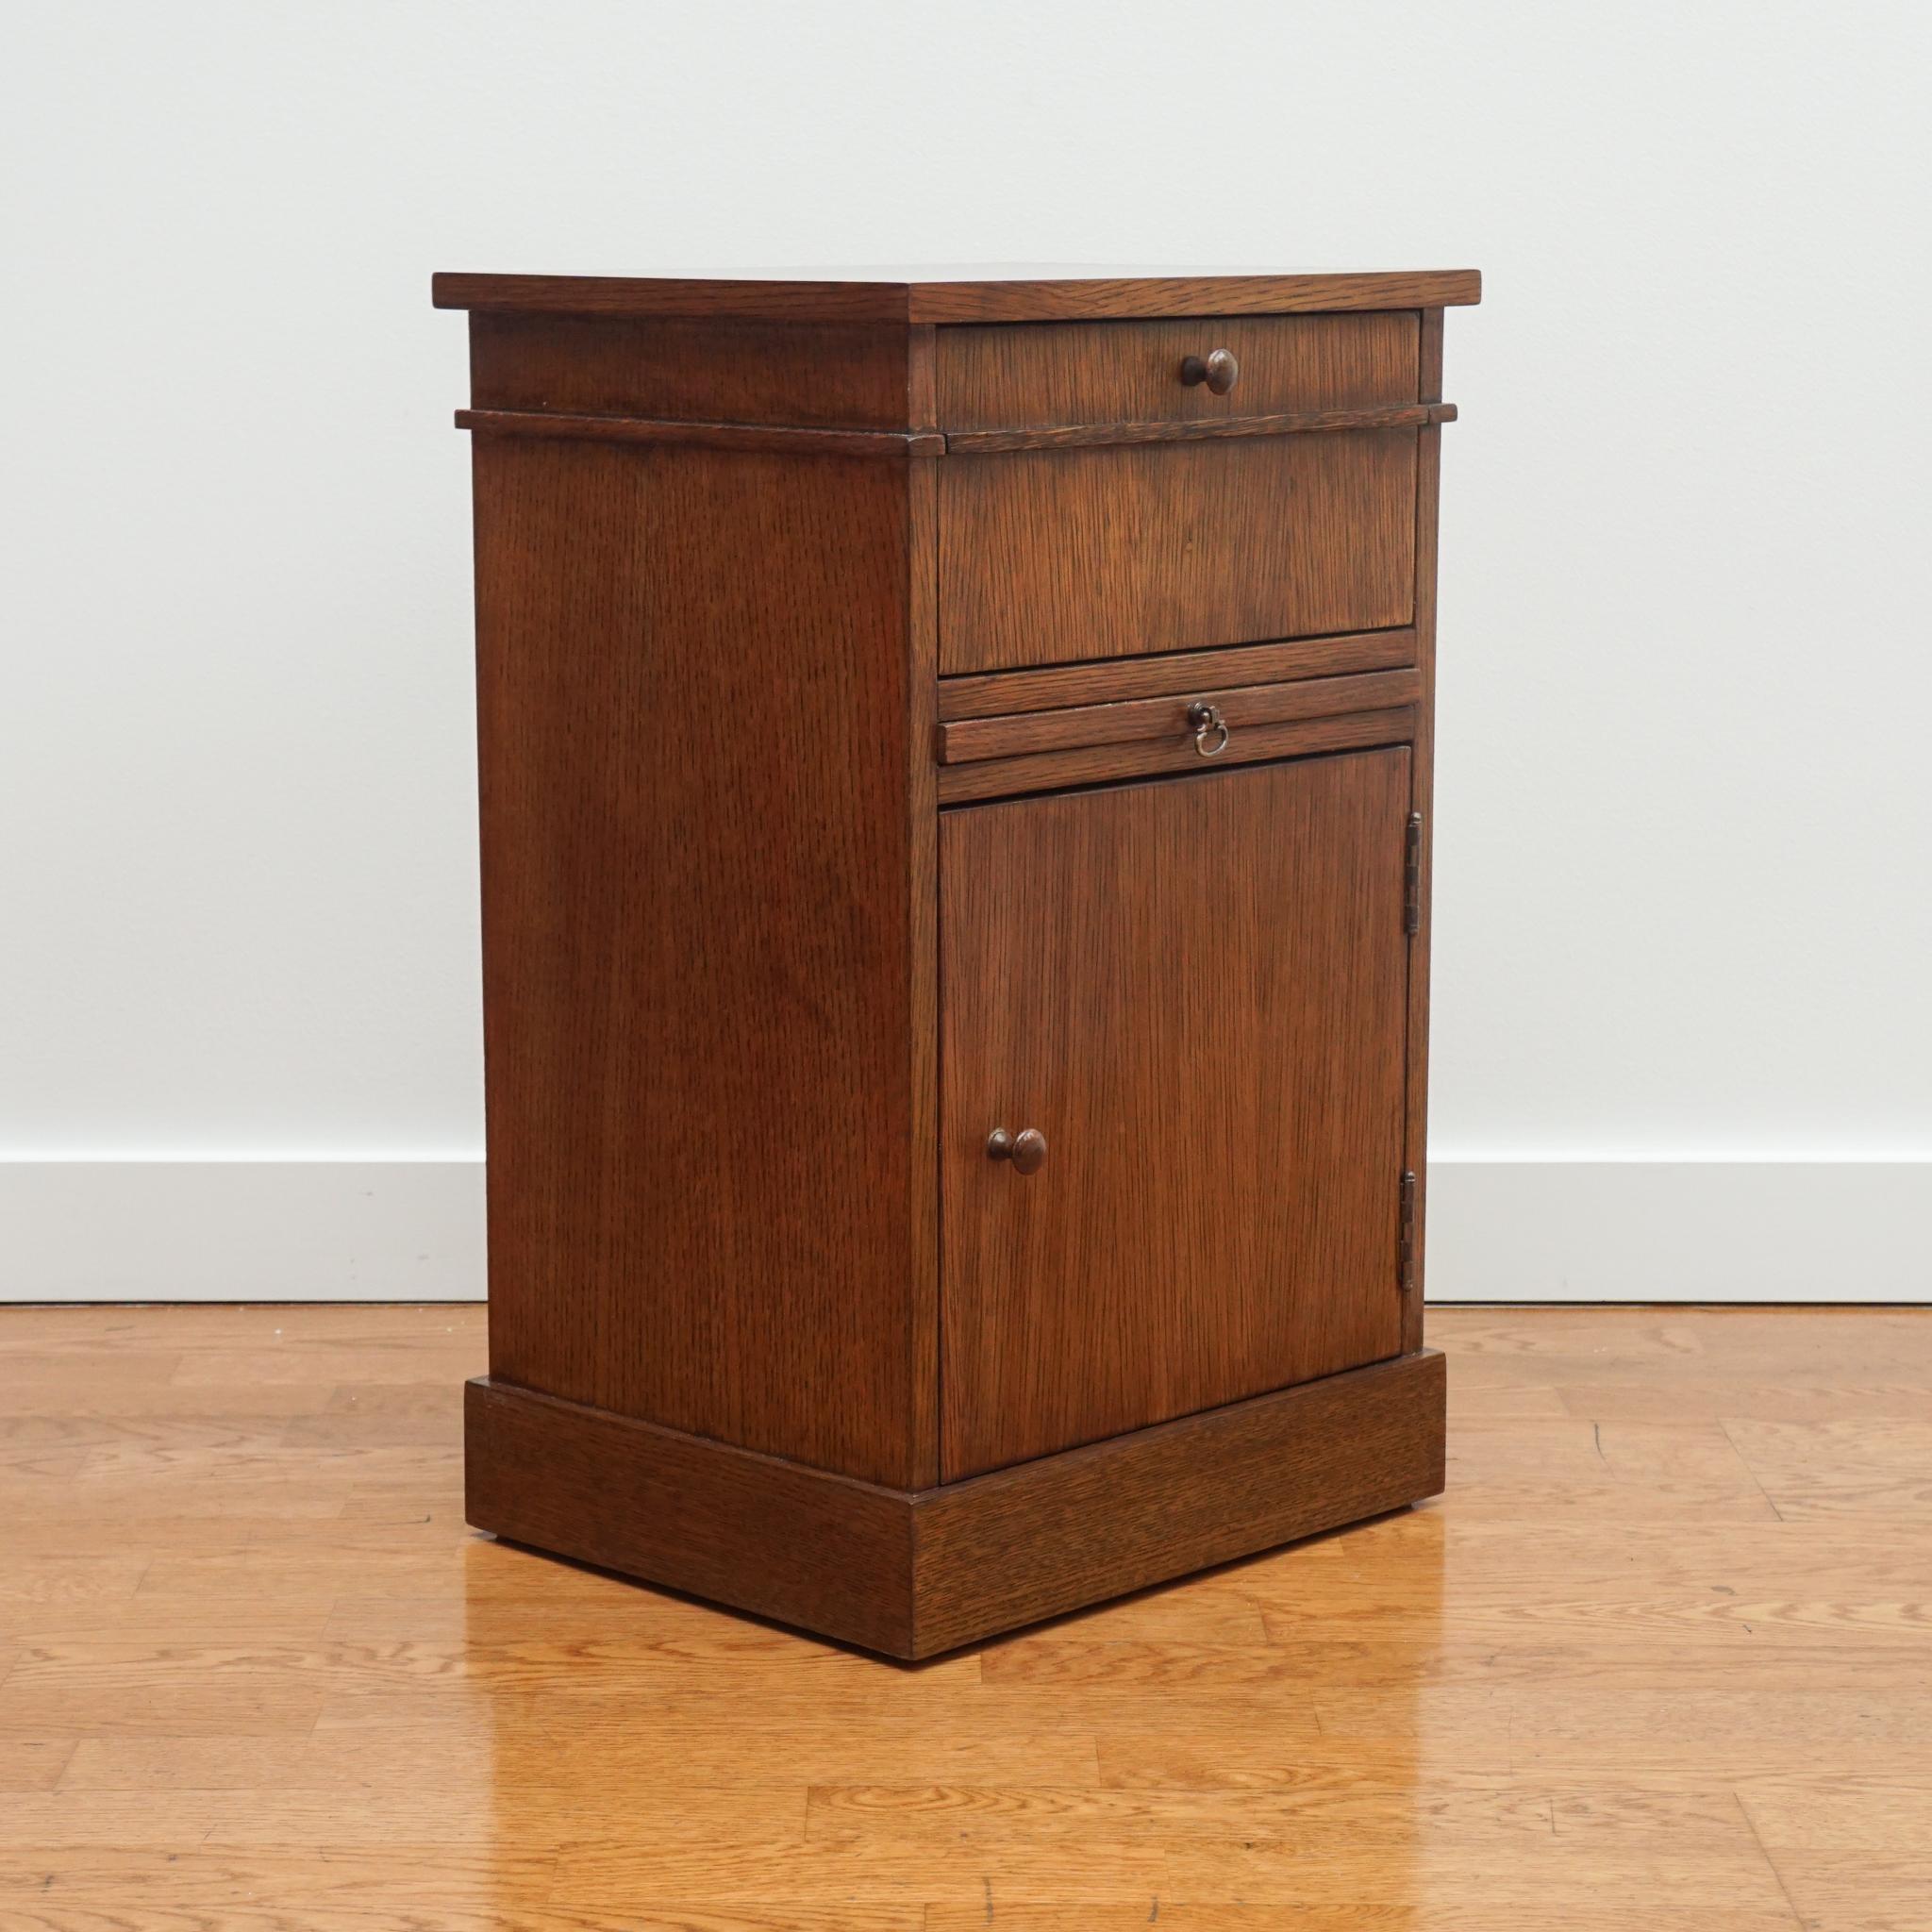 The Charleston door/drawer cabinet is one of the newest additions to the foley&cox HOME Collection of custom furniture.  Taking its inspiration from a 19th century mahogany piece, our cabinet has been re-imagined in white oak and slightly altered in